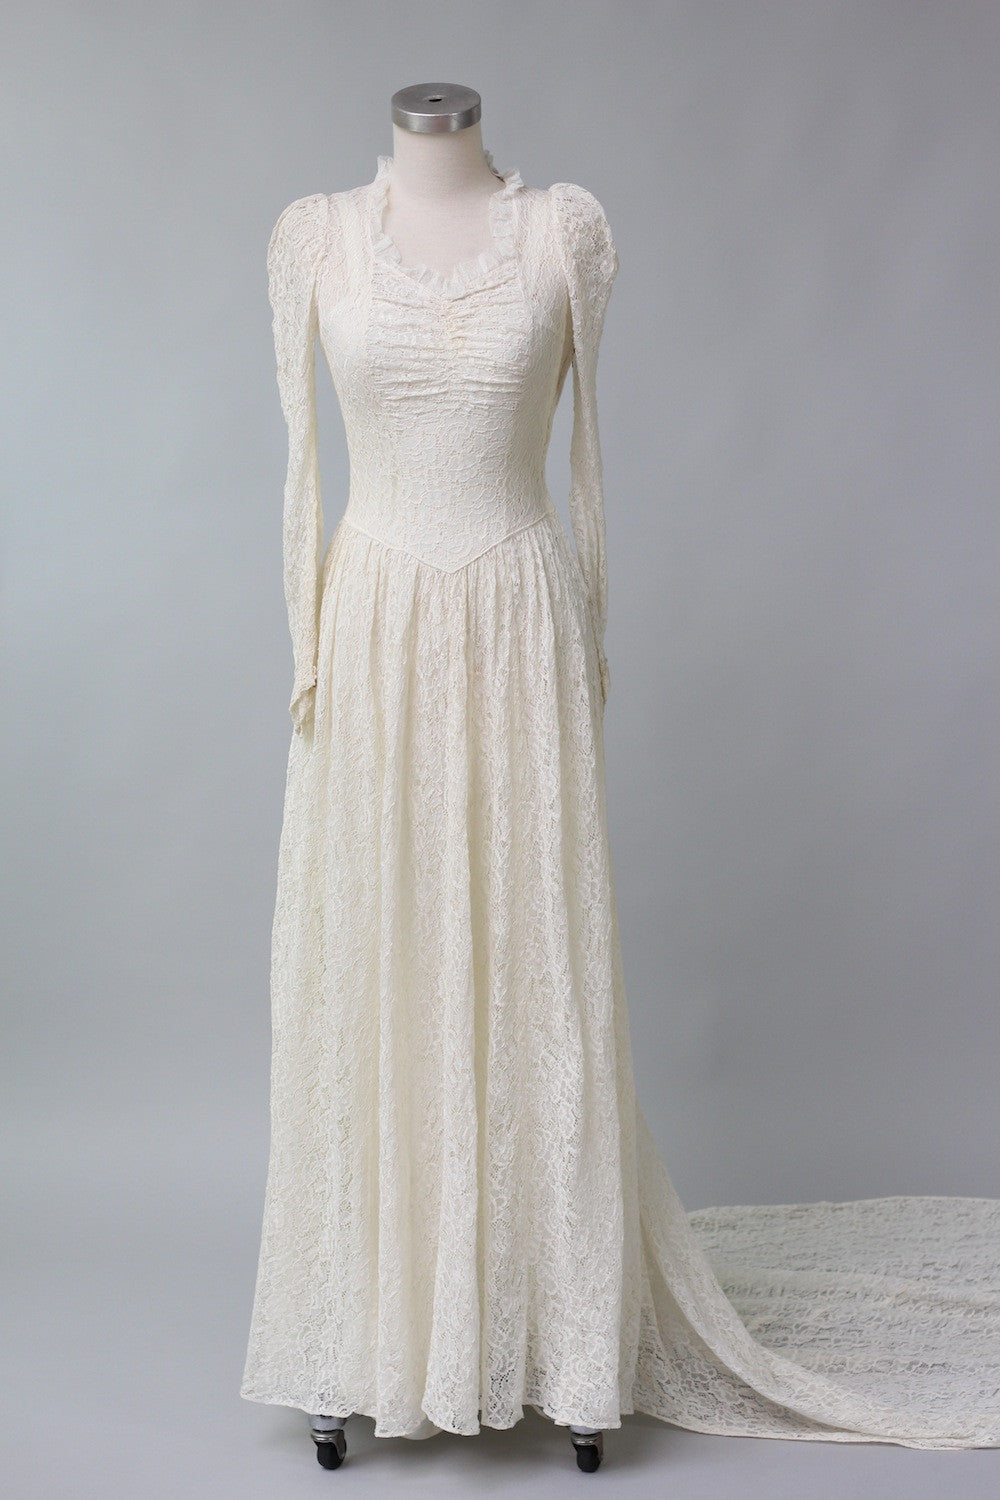 Handmade 1930s 1940s Lace Wedding Gown